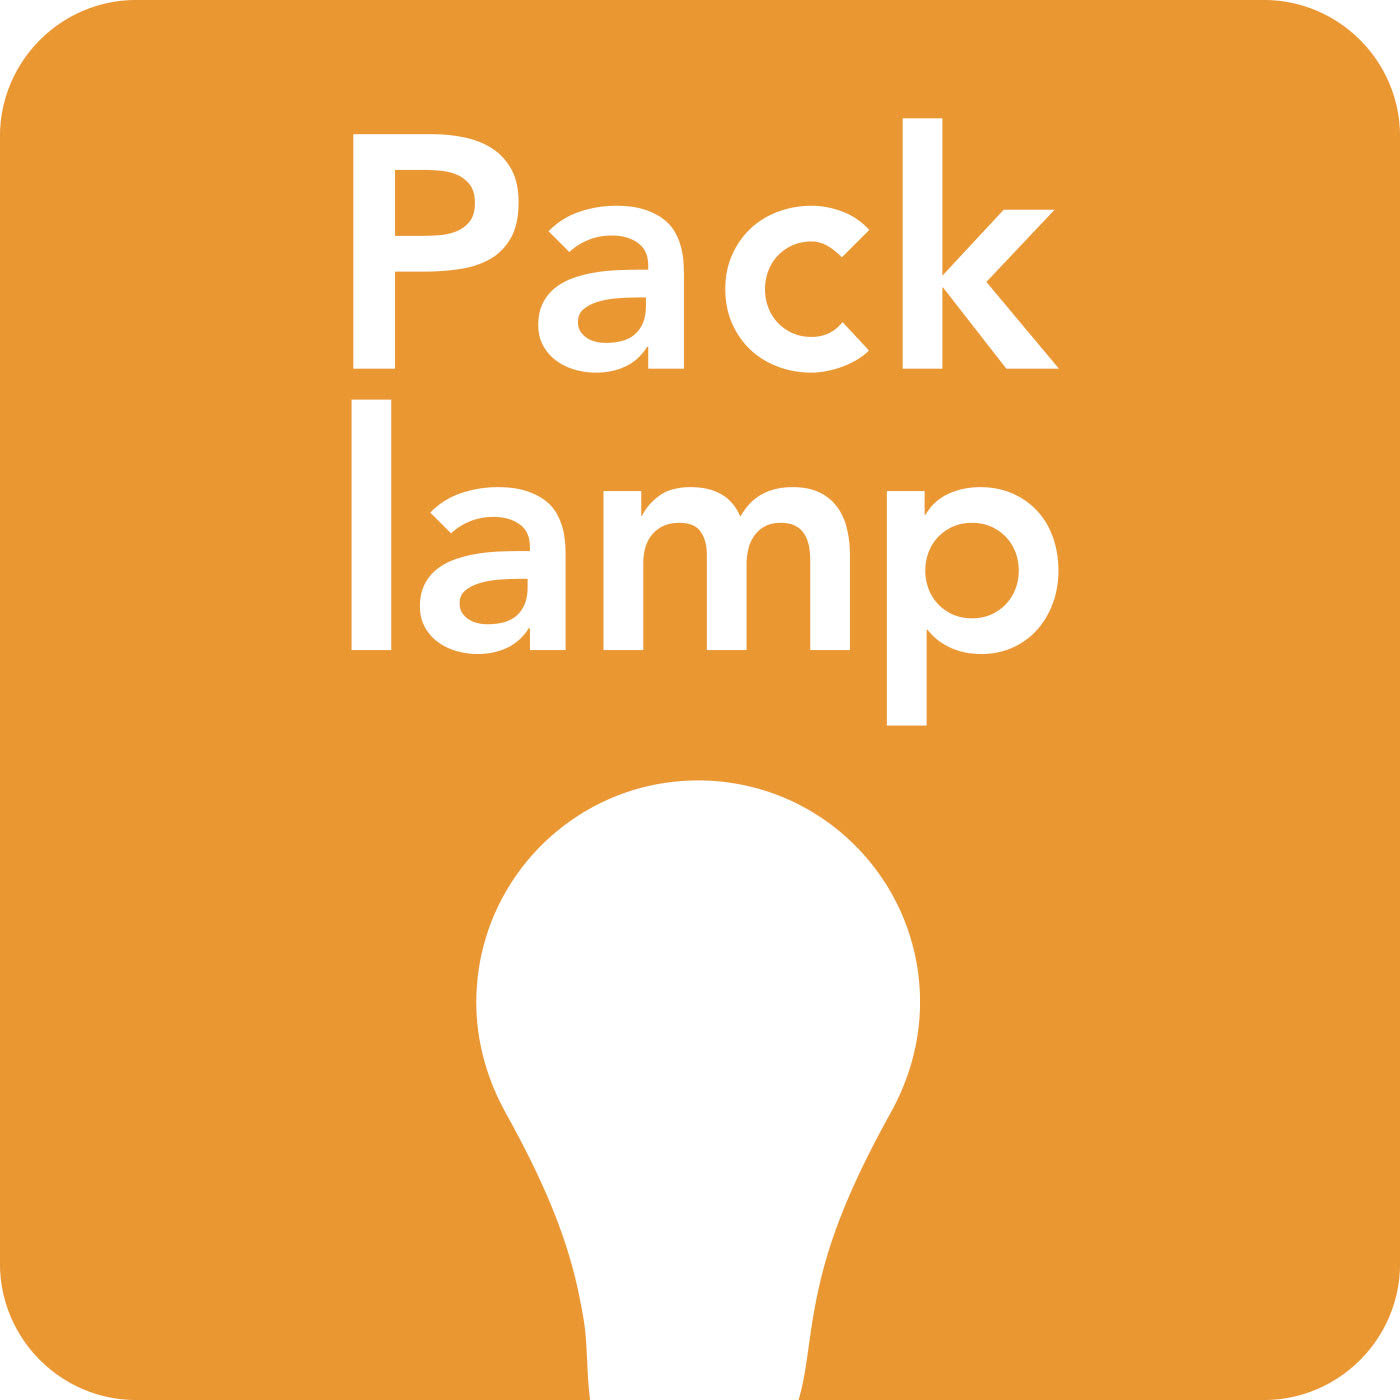 Packlamp